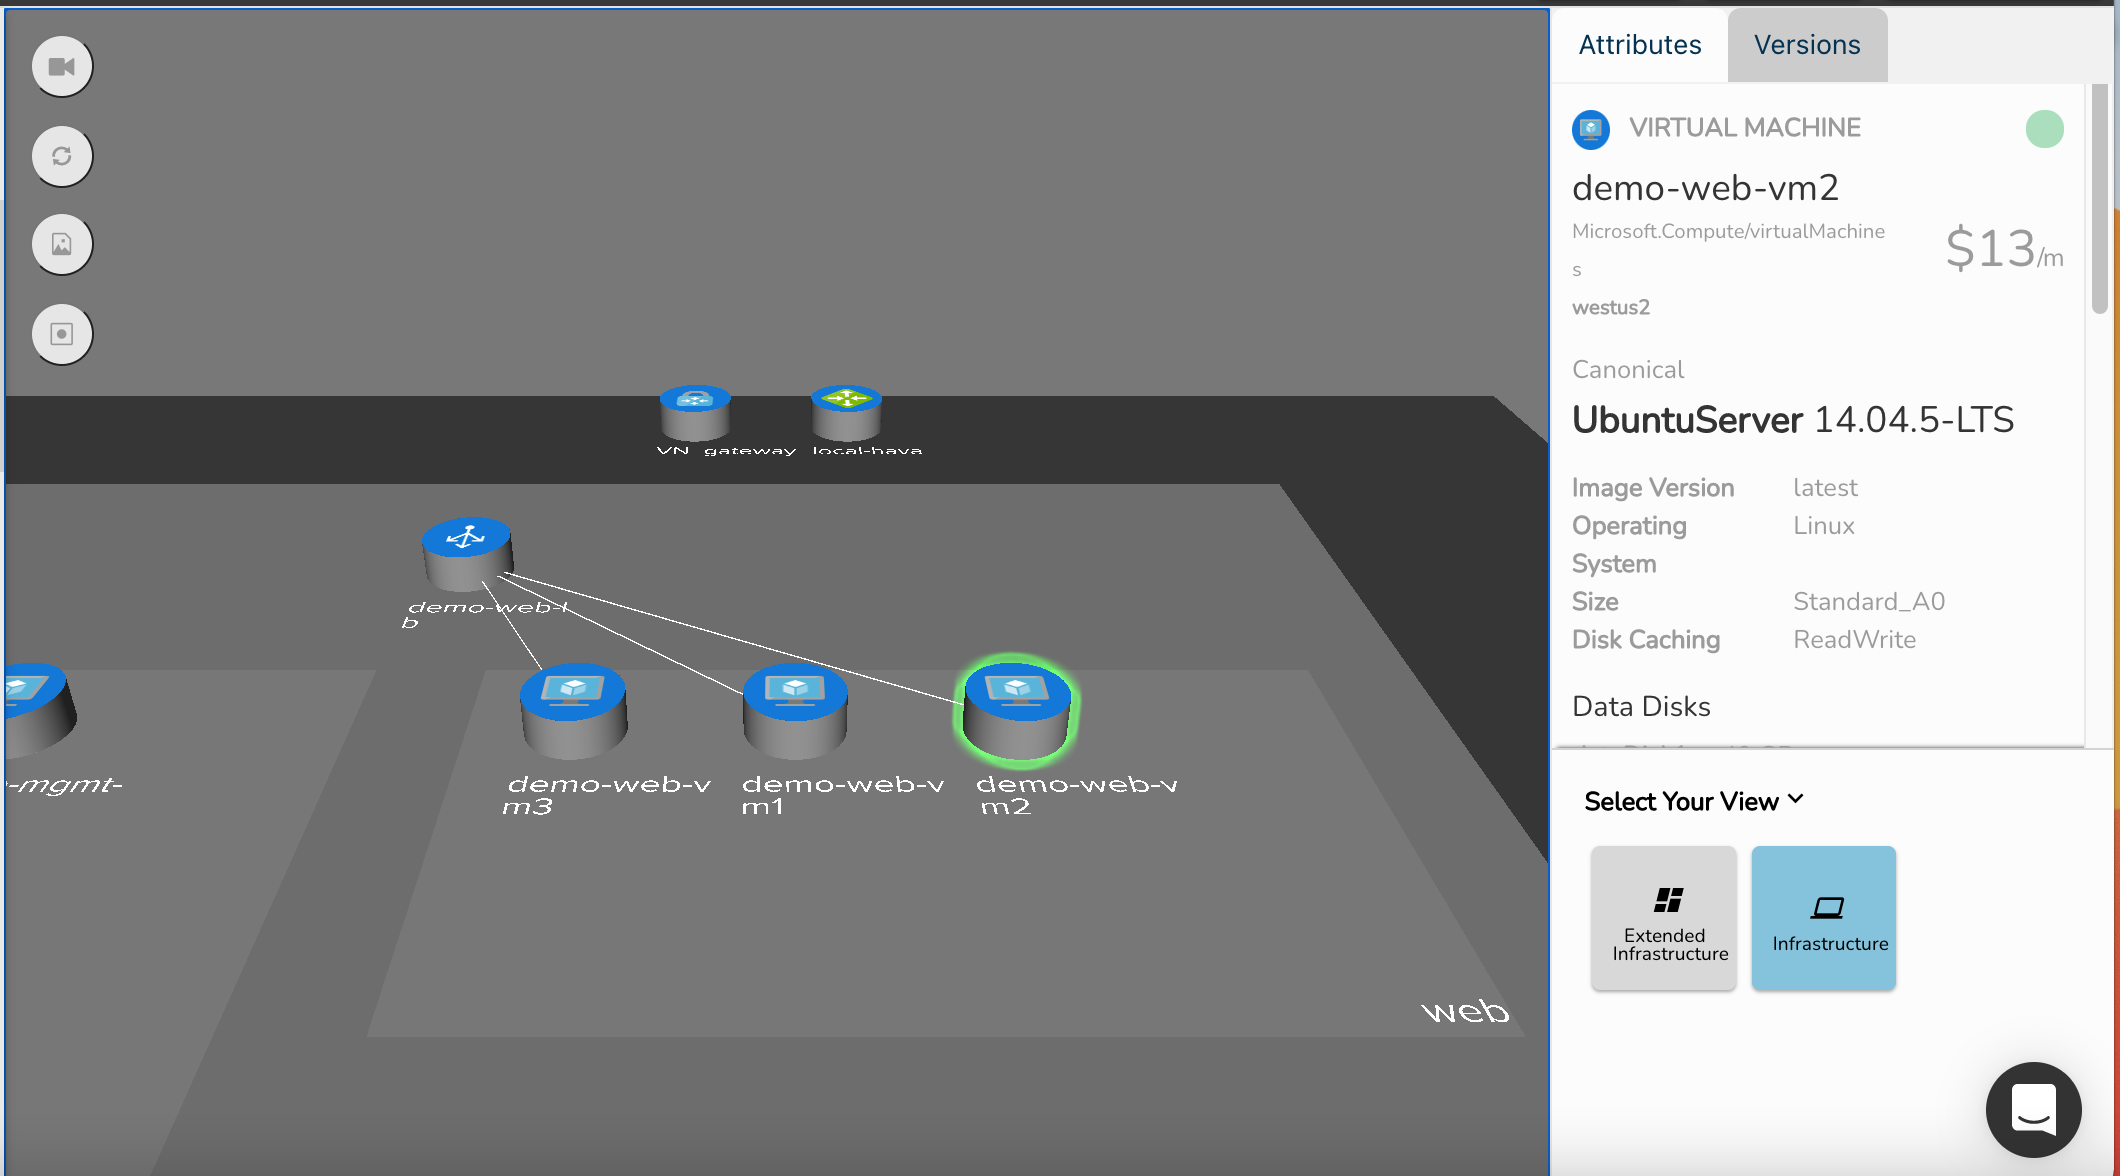 Azure_3d_diagram_with_vm_selected